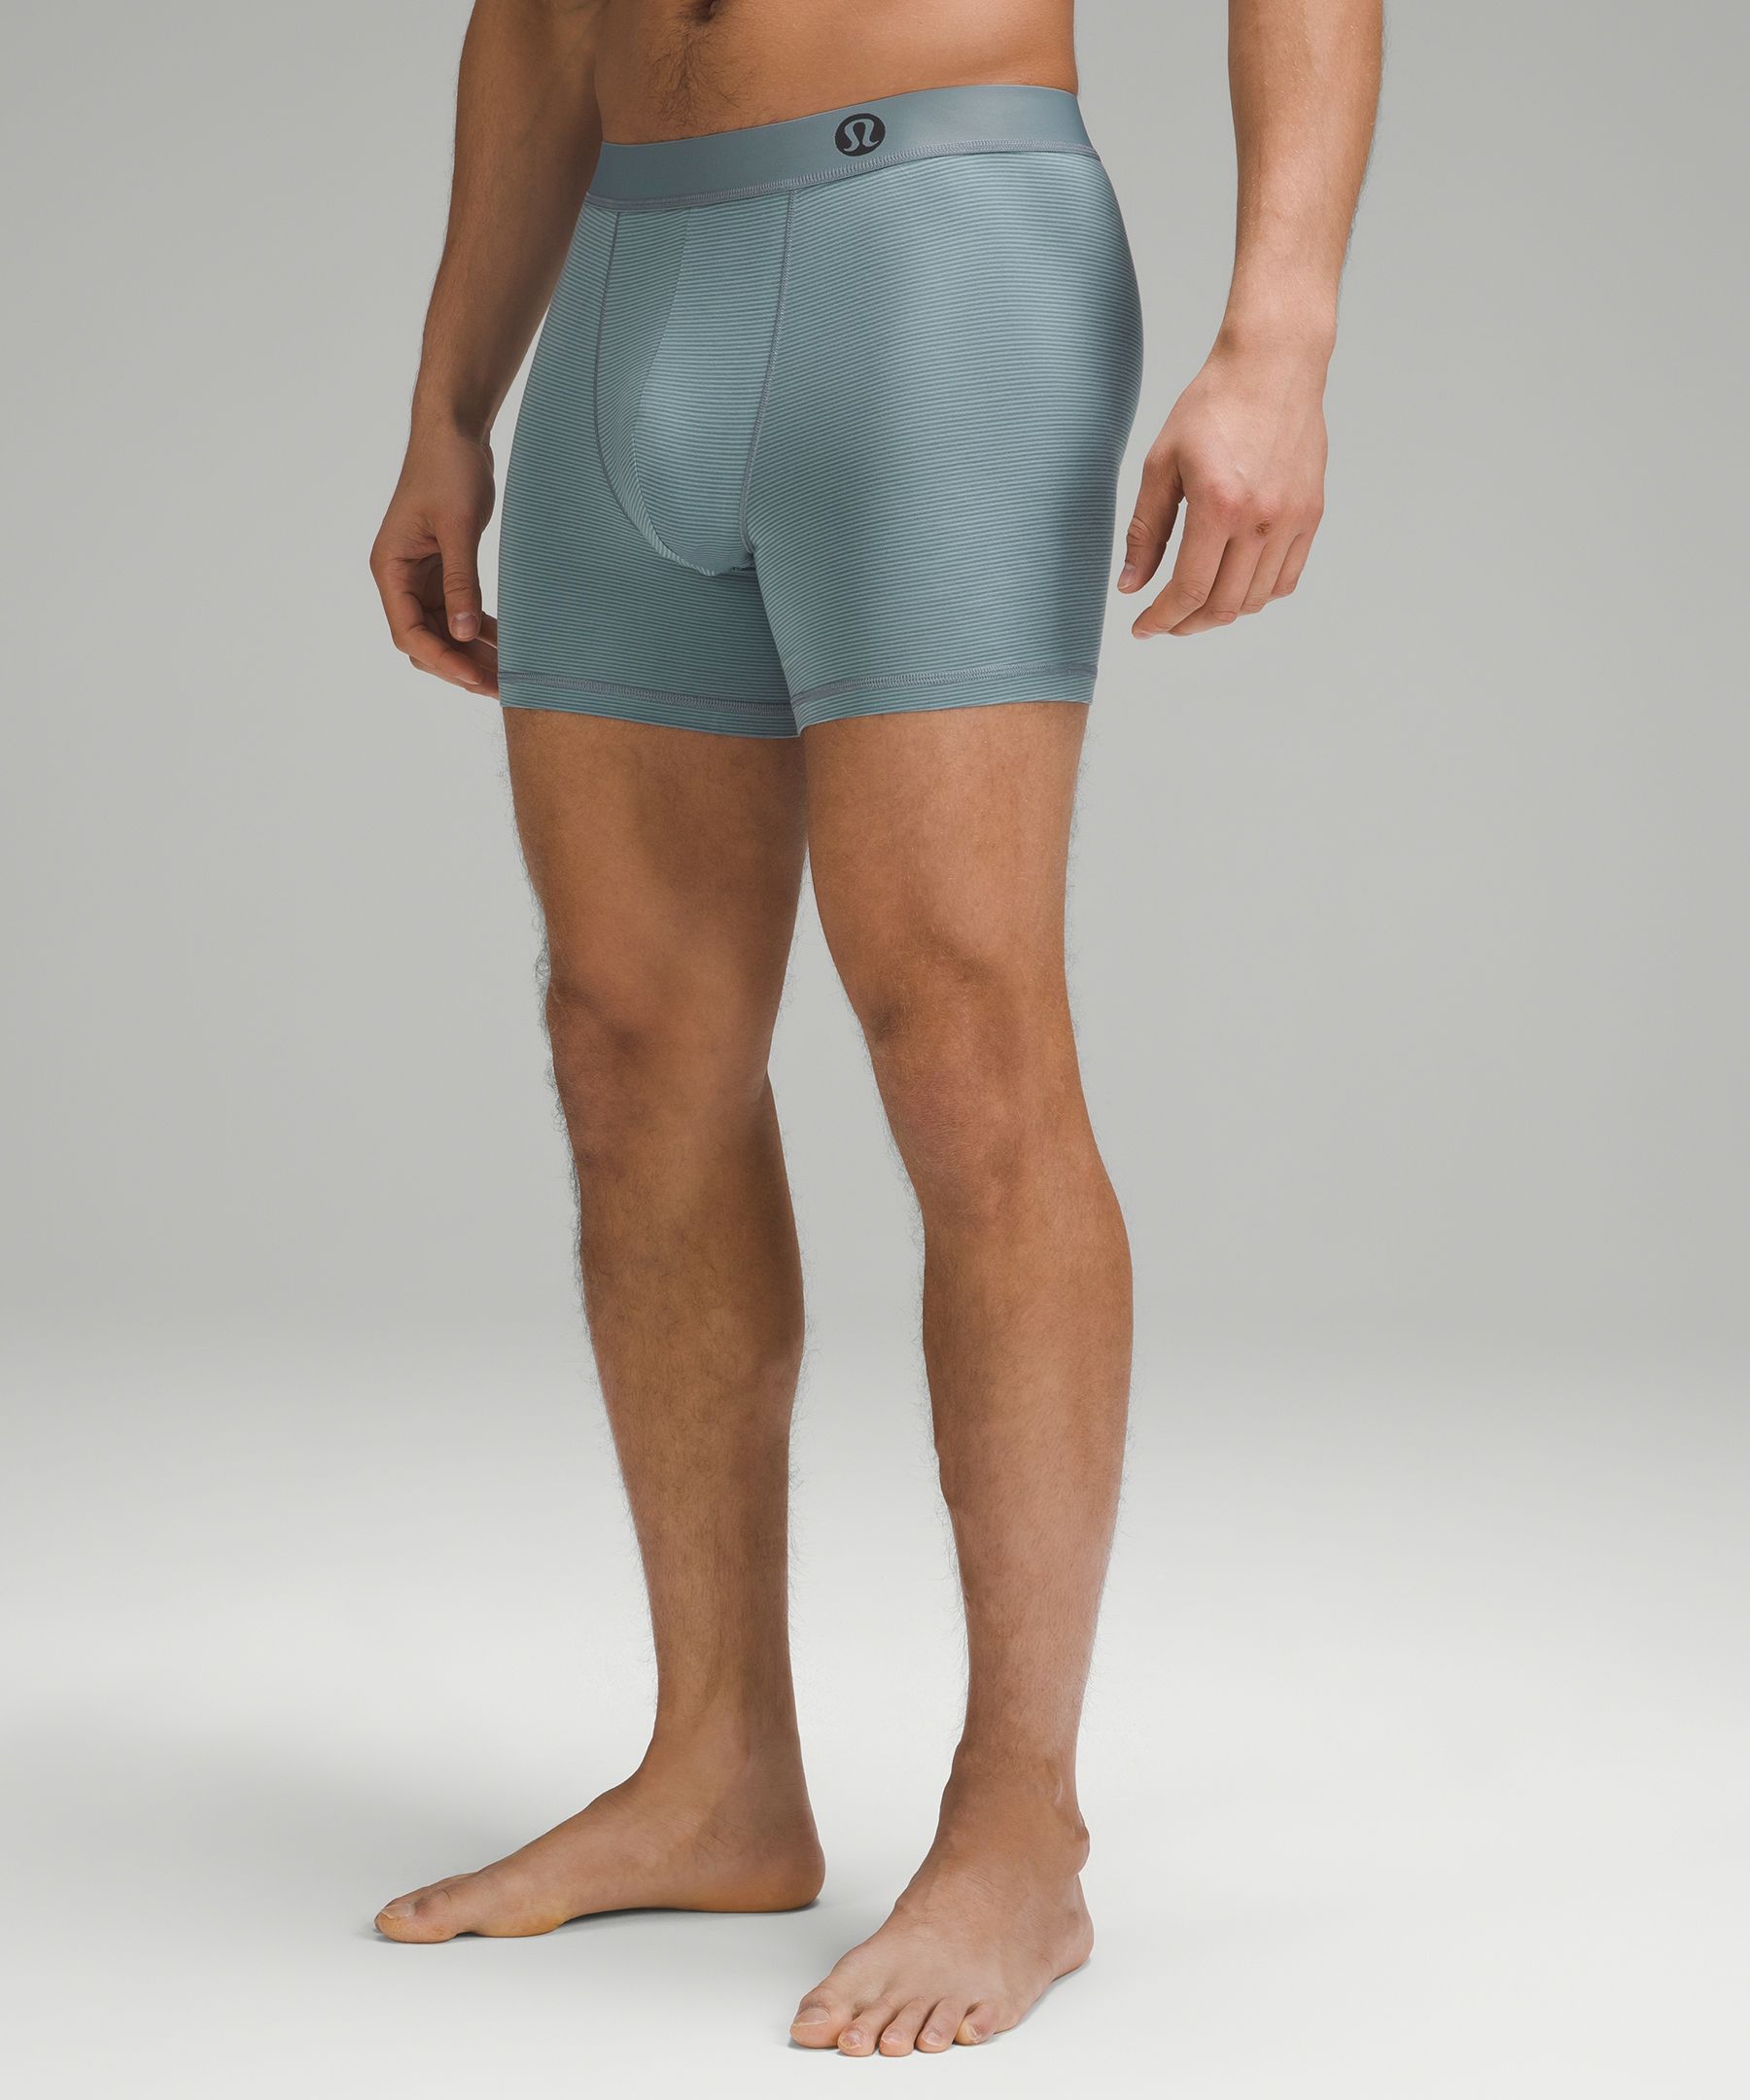 Lululemon Always In Motion Brief With Fly Reviews